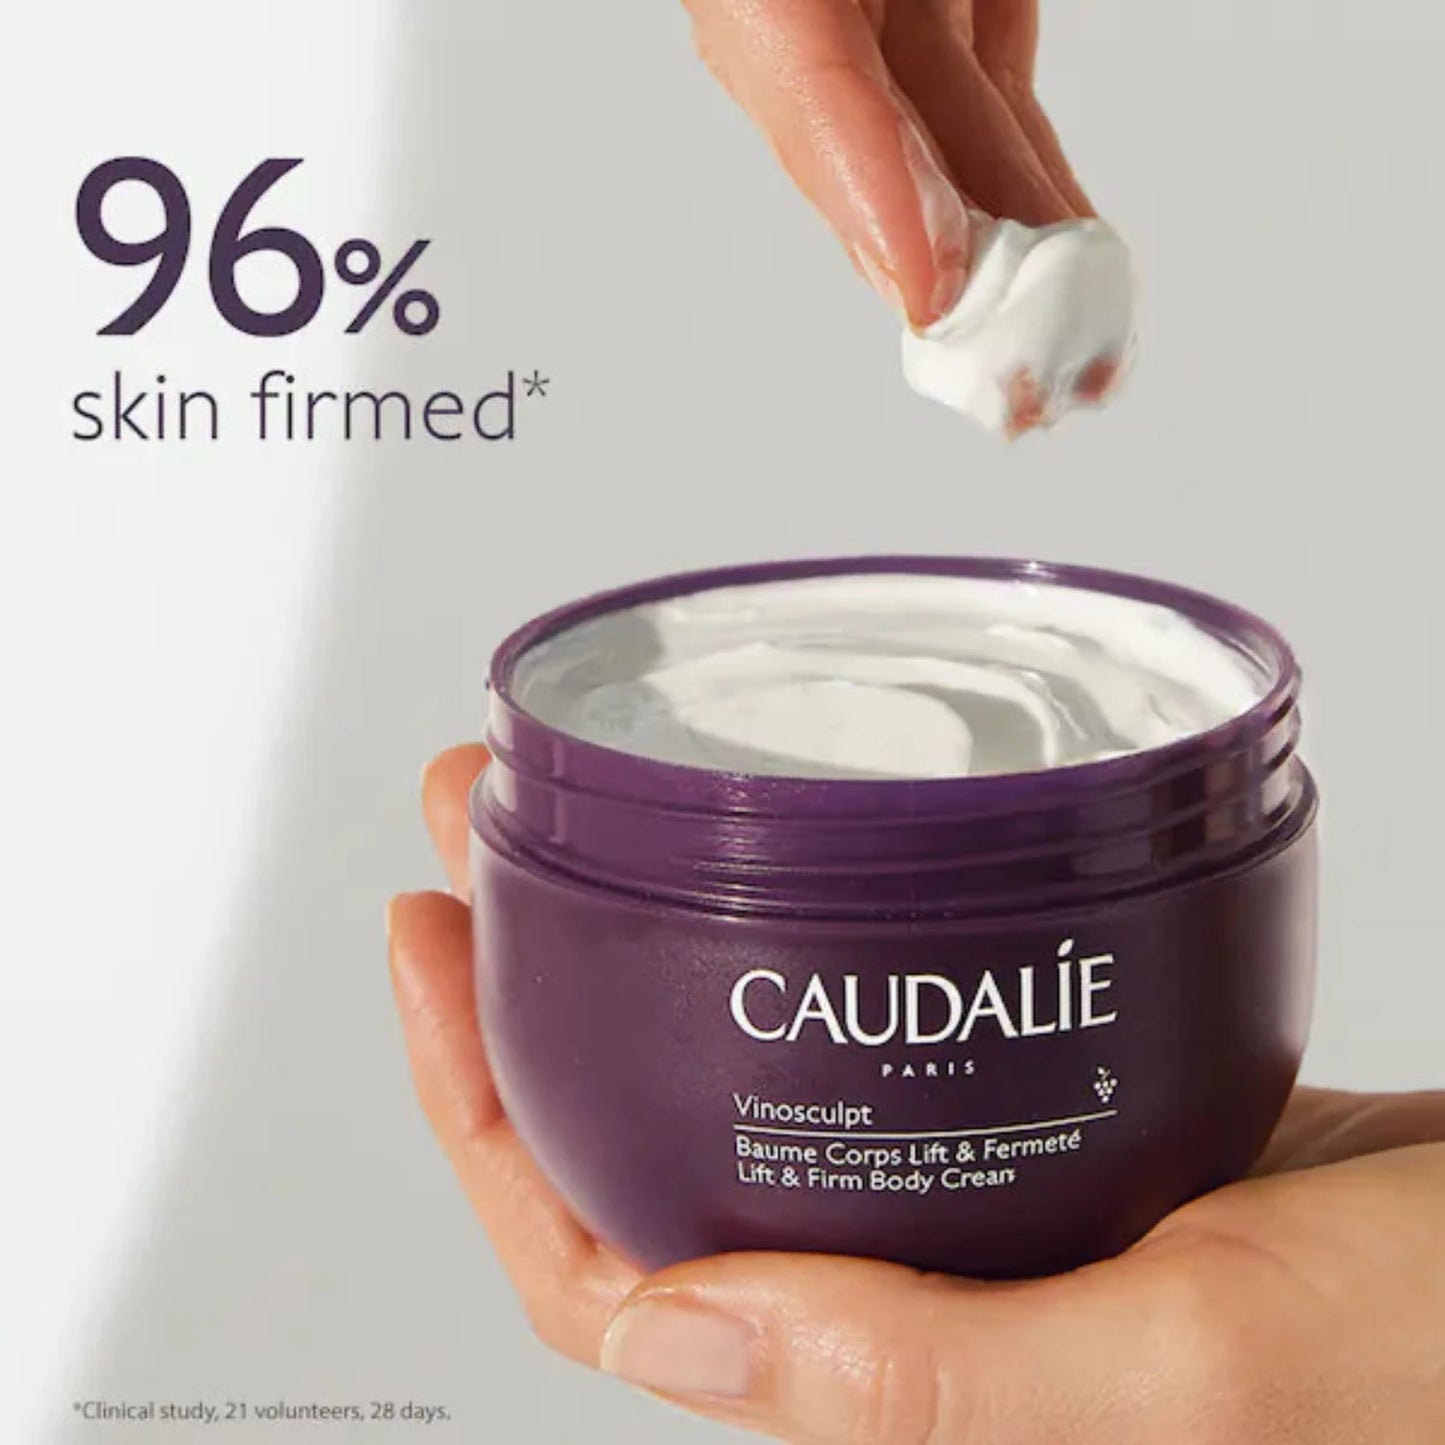 Caudalie Vinosculpt Lift & Firm Body Cream visible results of skin being toned and firmed.